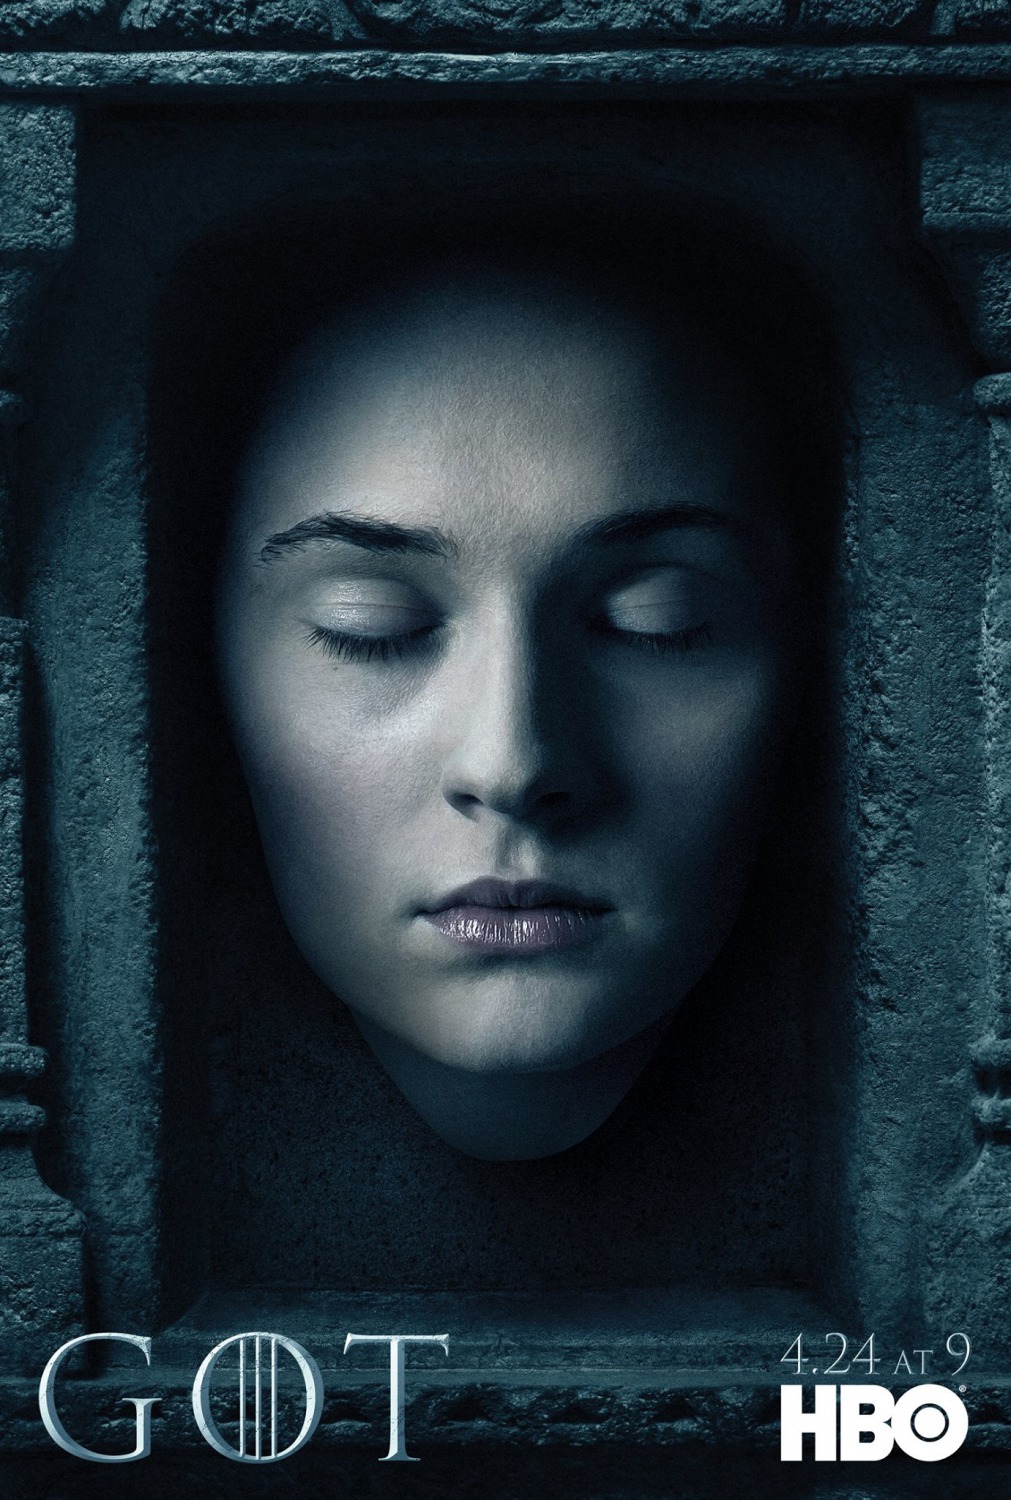 Extra Large TV Poster Image for Game of Thrones (#71 of 125)